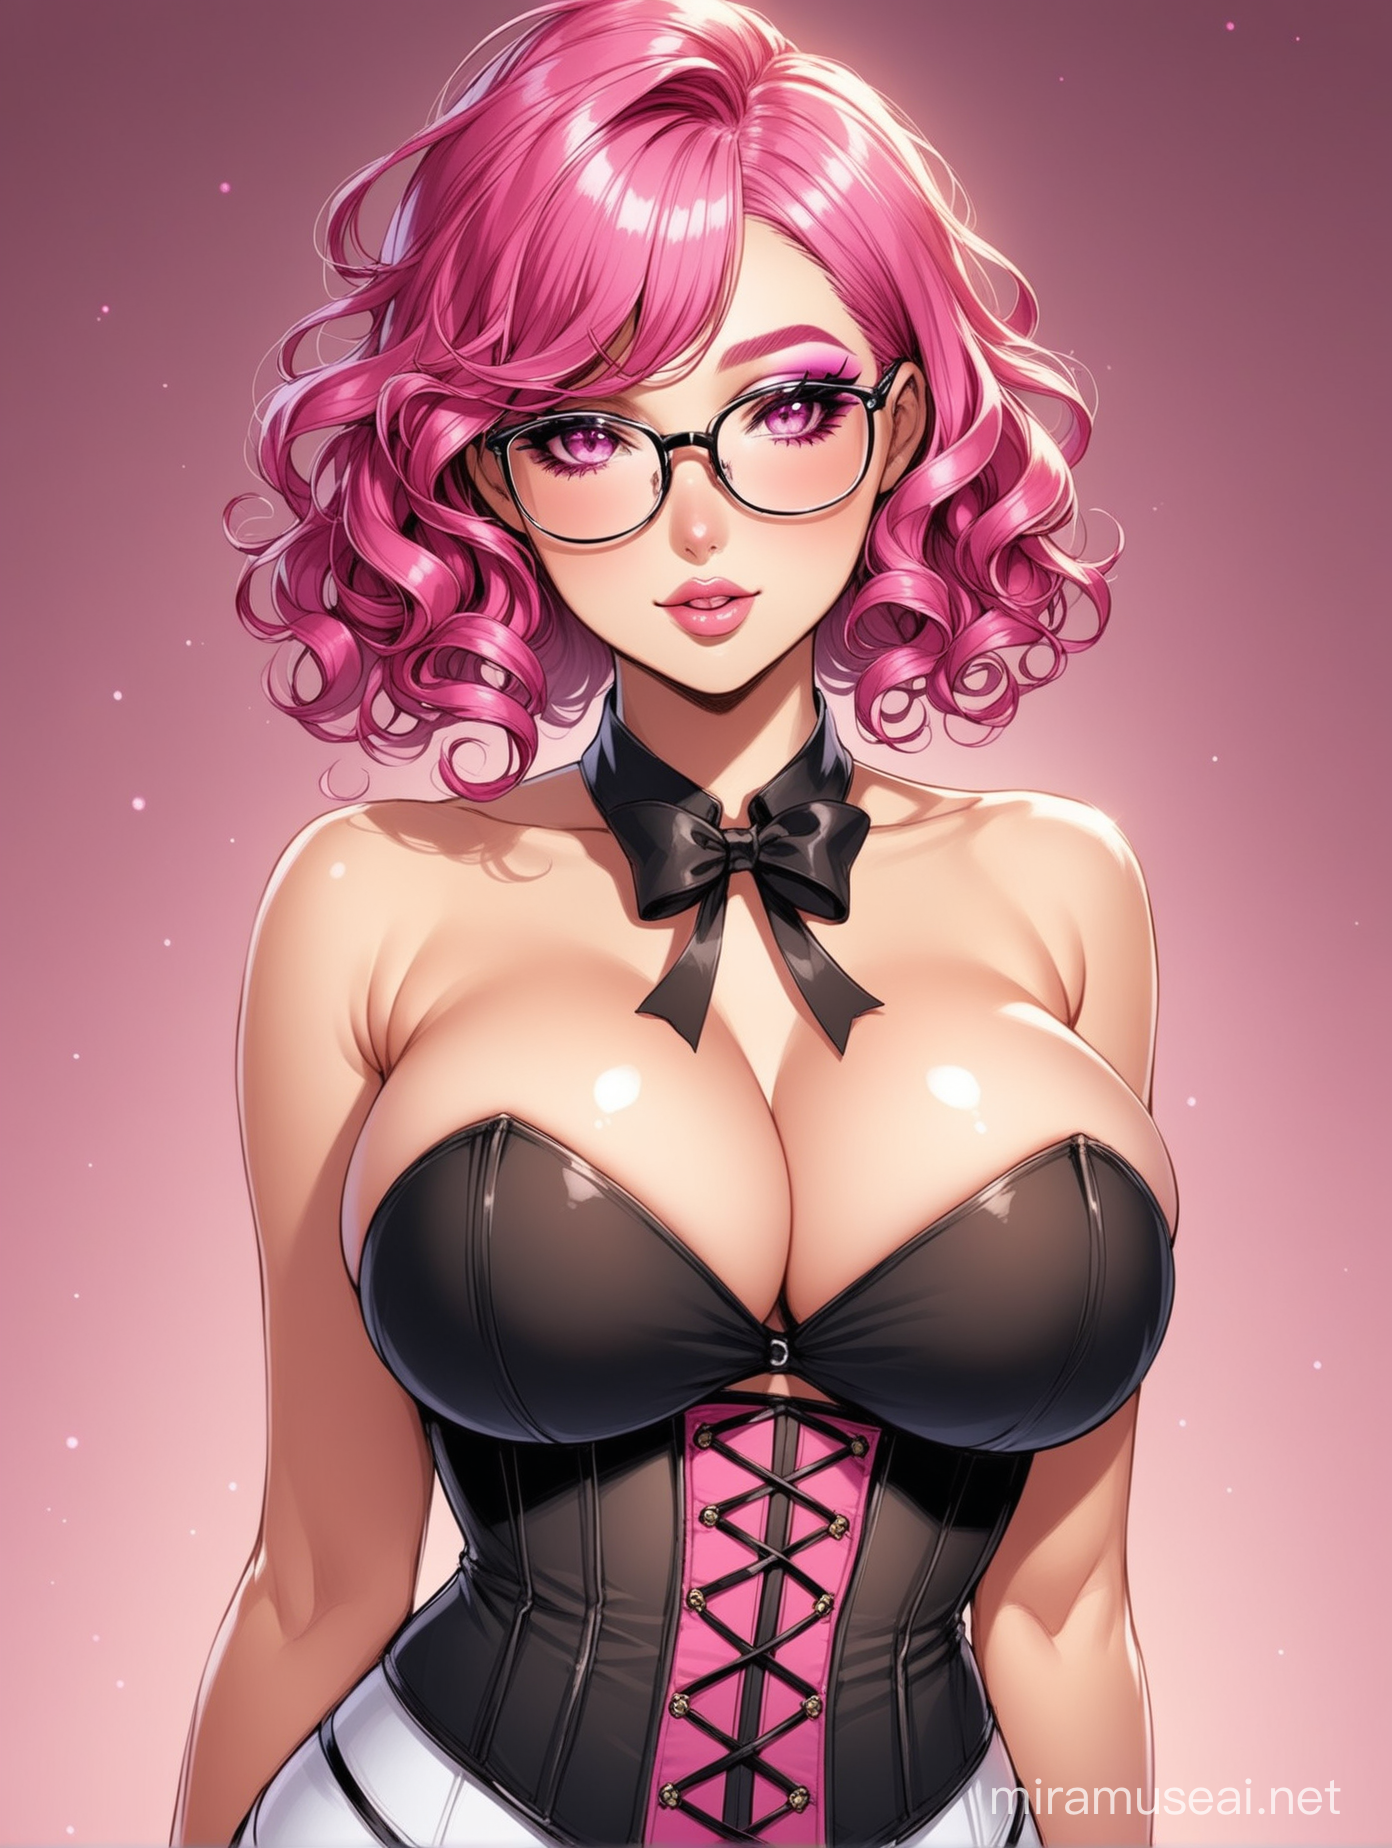 Short curly pink hair,glasses,gorgeous,wearing makeup,big breast,wearing a sexy corset